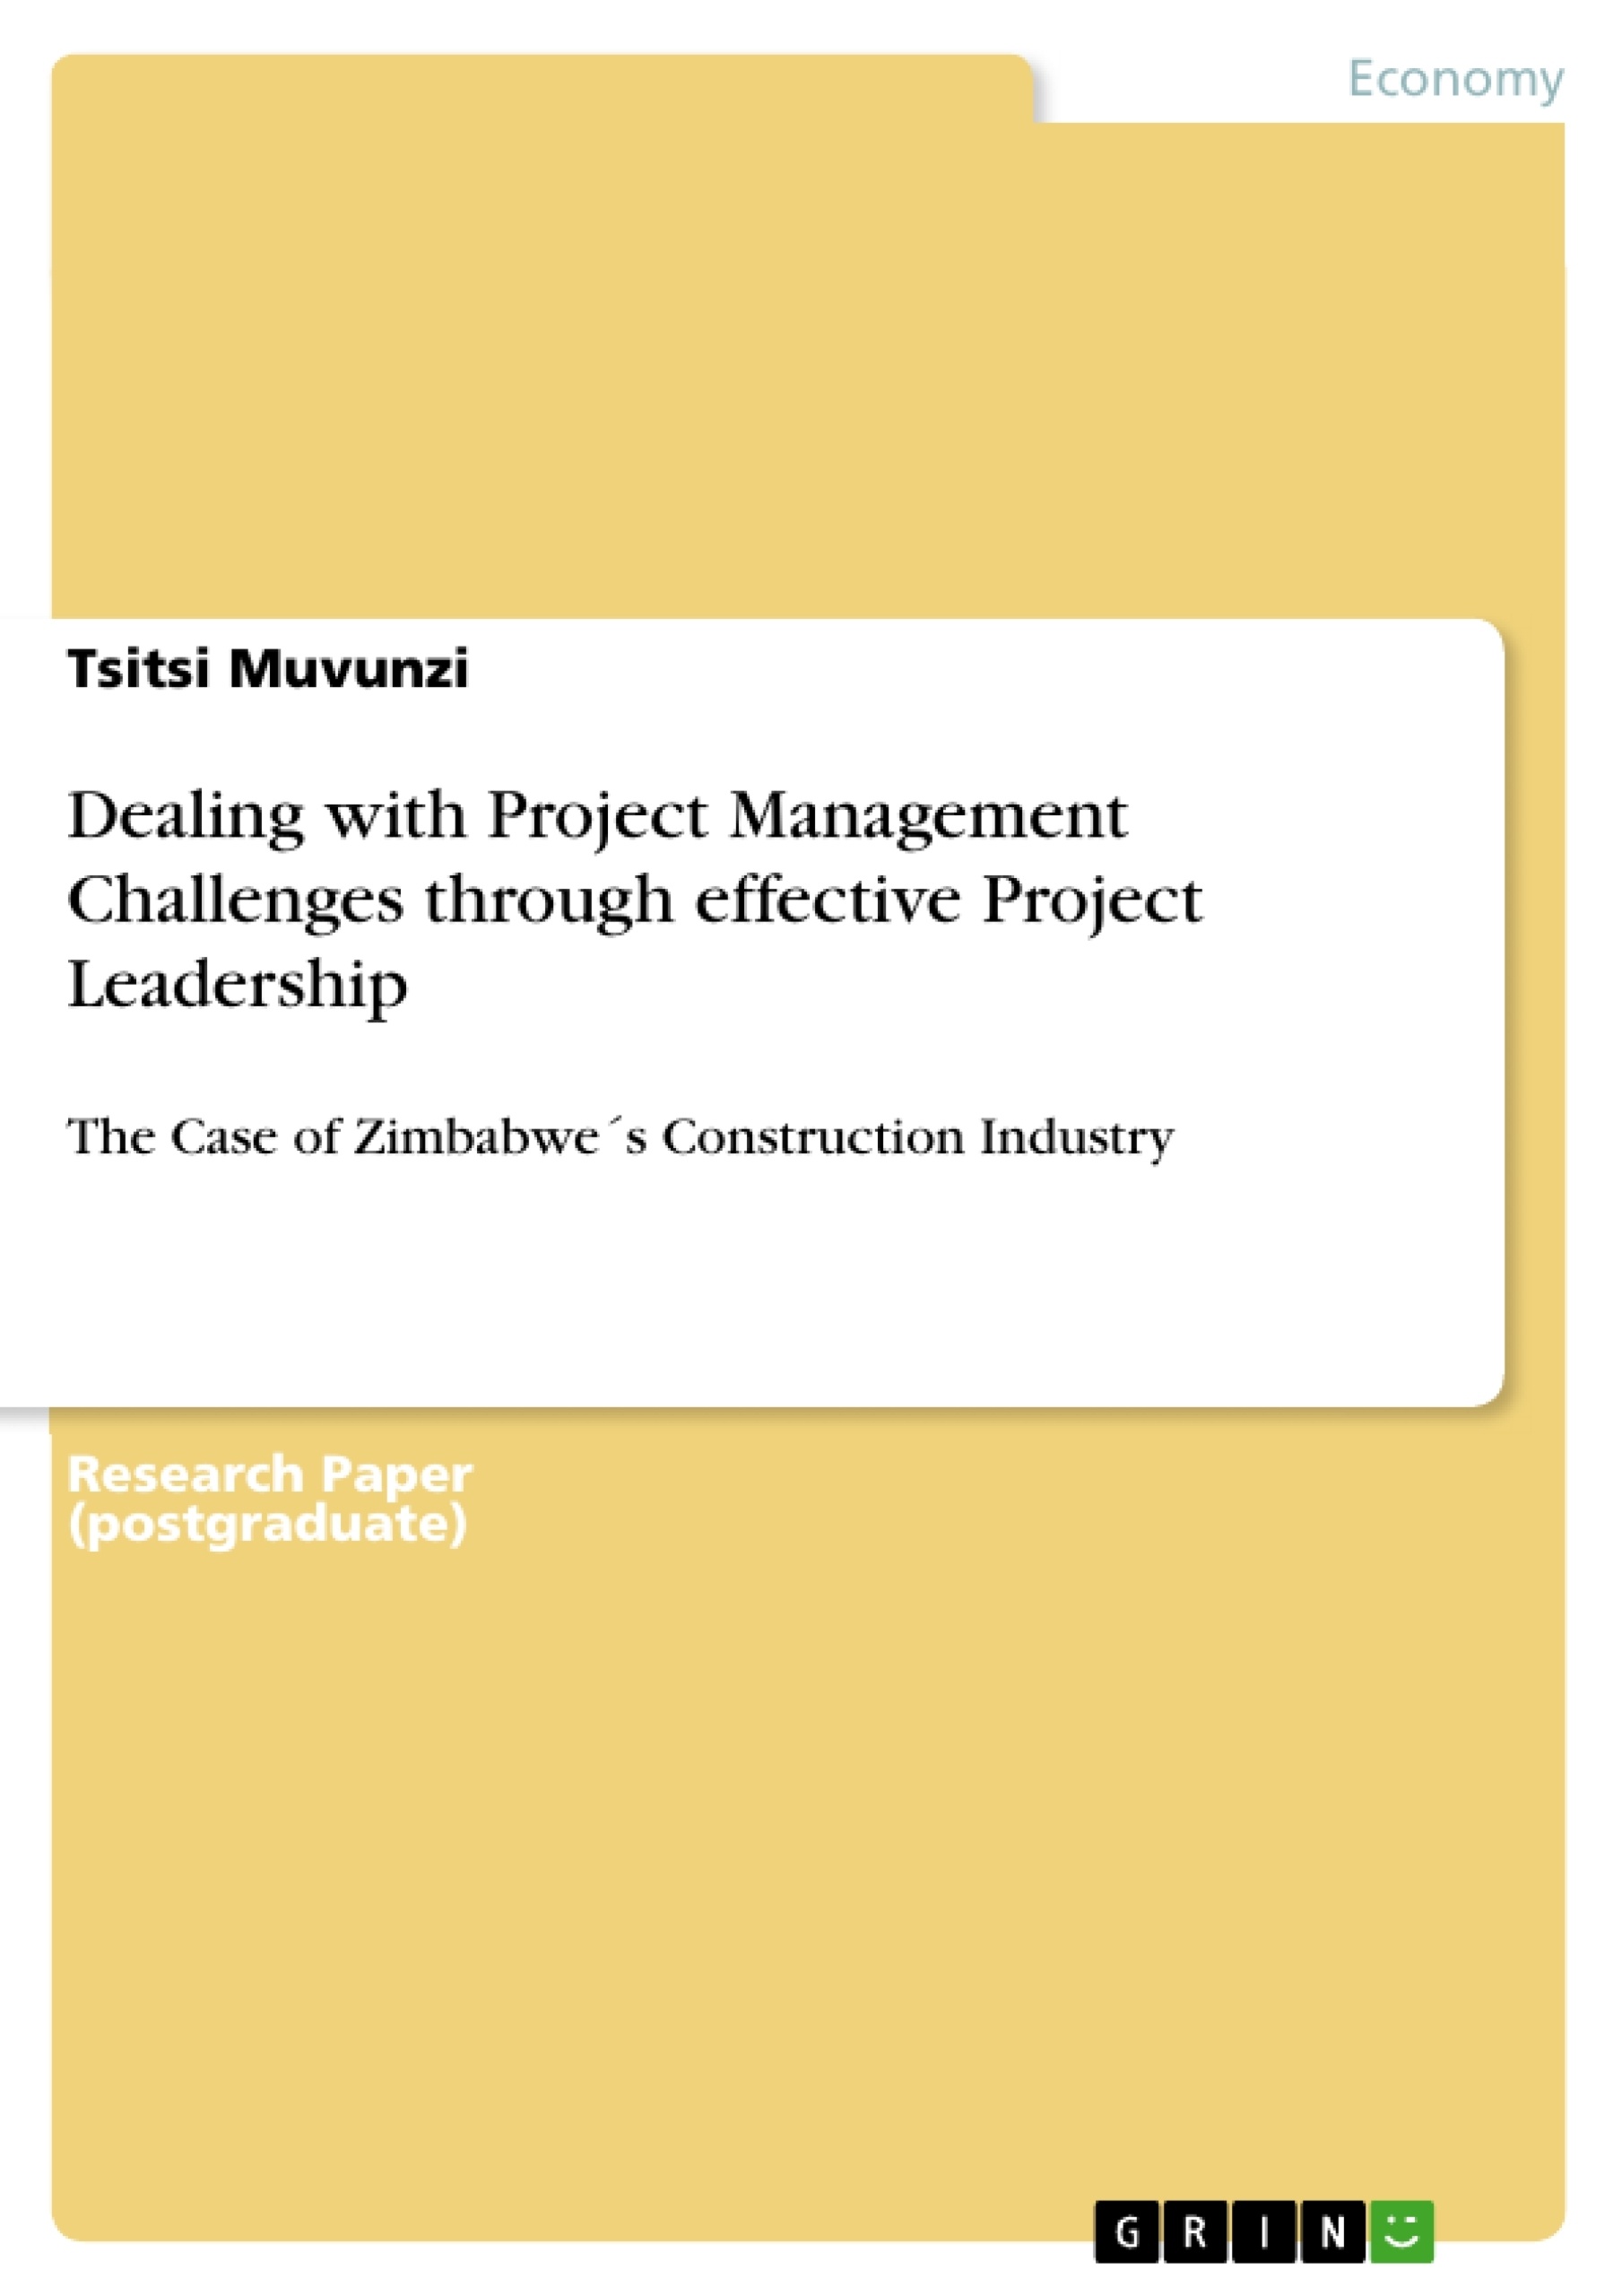 Título: Dealing with Project Management Challenges through effective Project Leadership